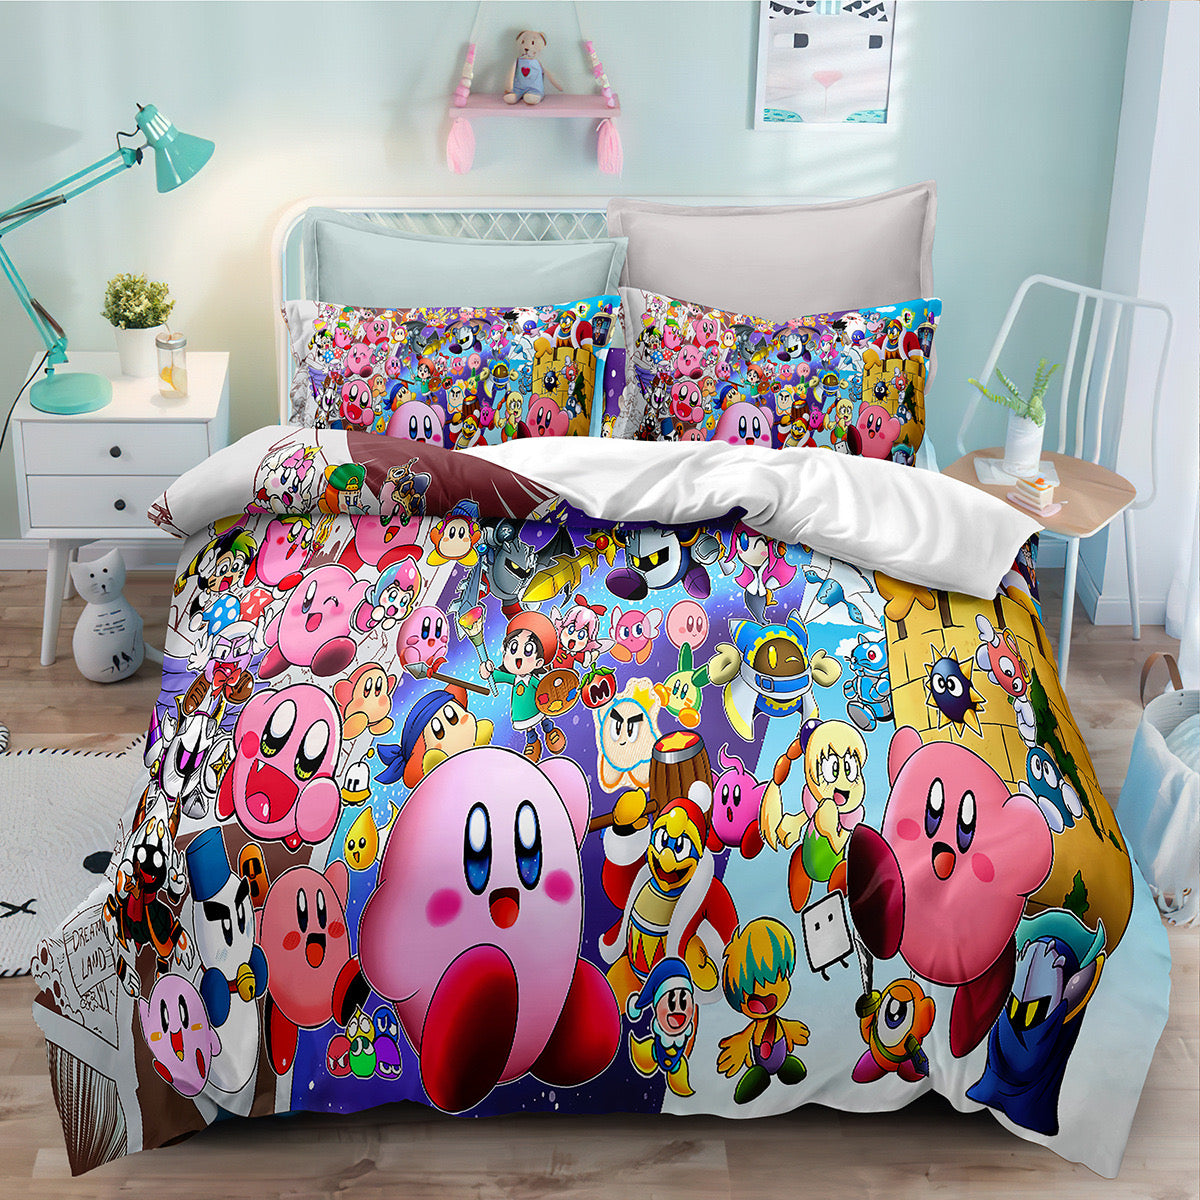 Kirby & The Amazing Mirror Duvet Cover Quilt Cover Pillowcase Bedding Set Bed Linen Home Bedroom Decor